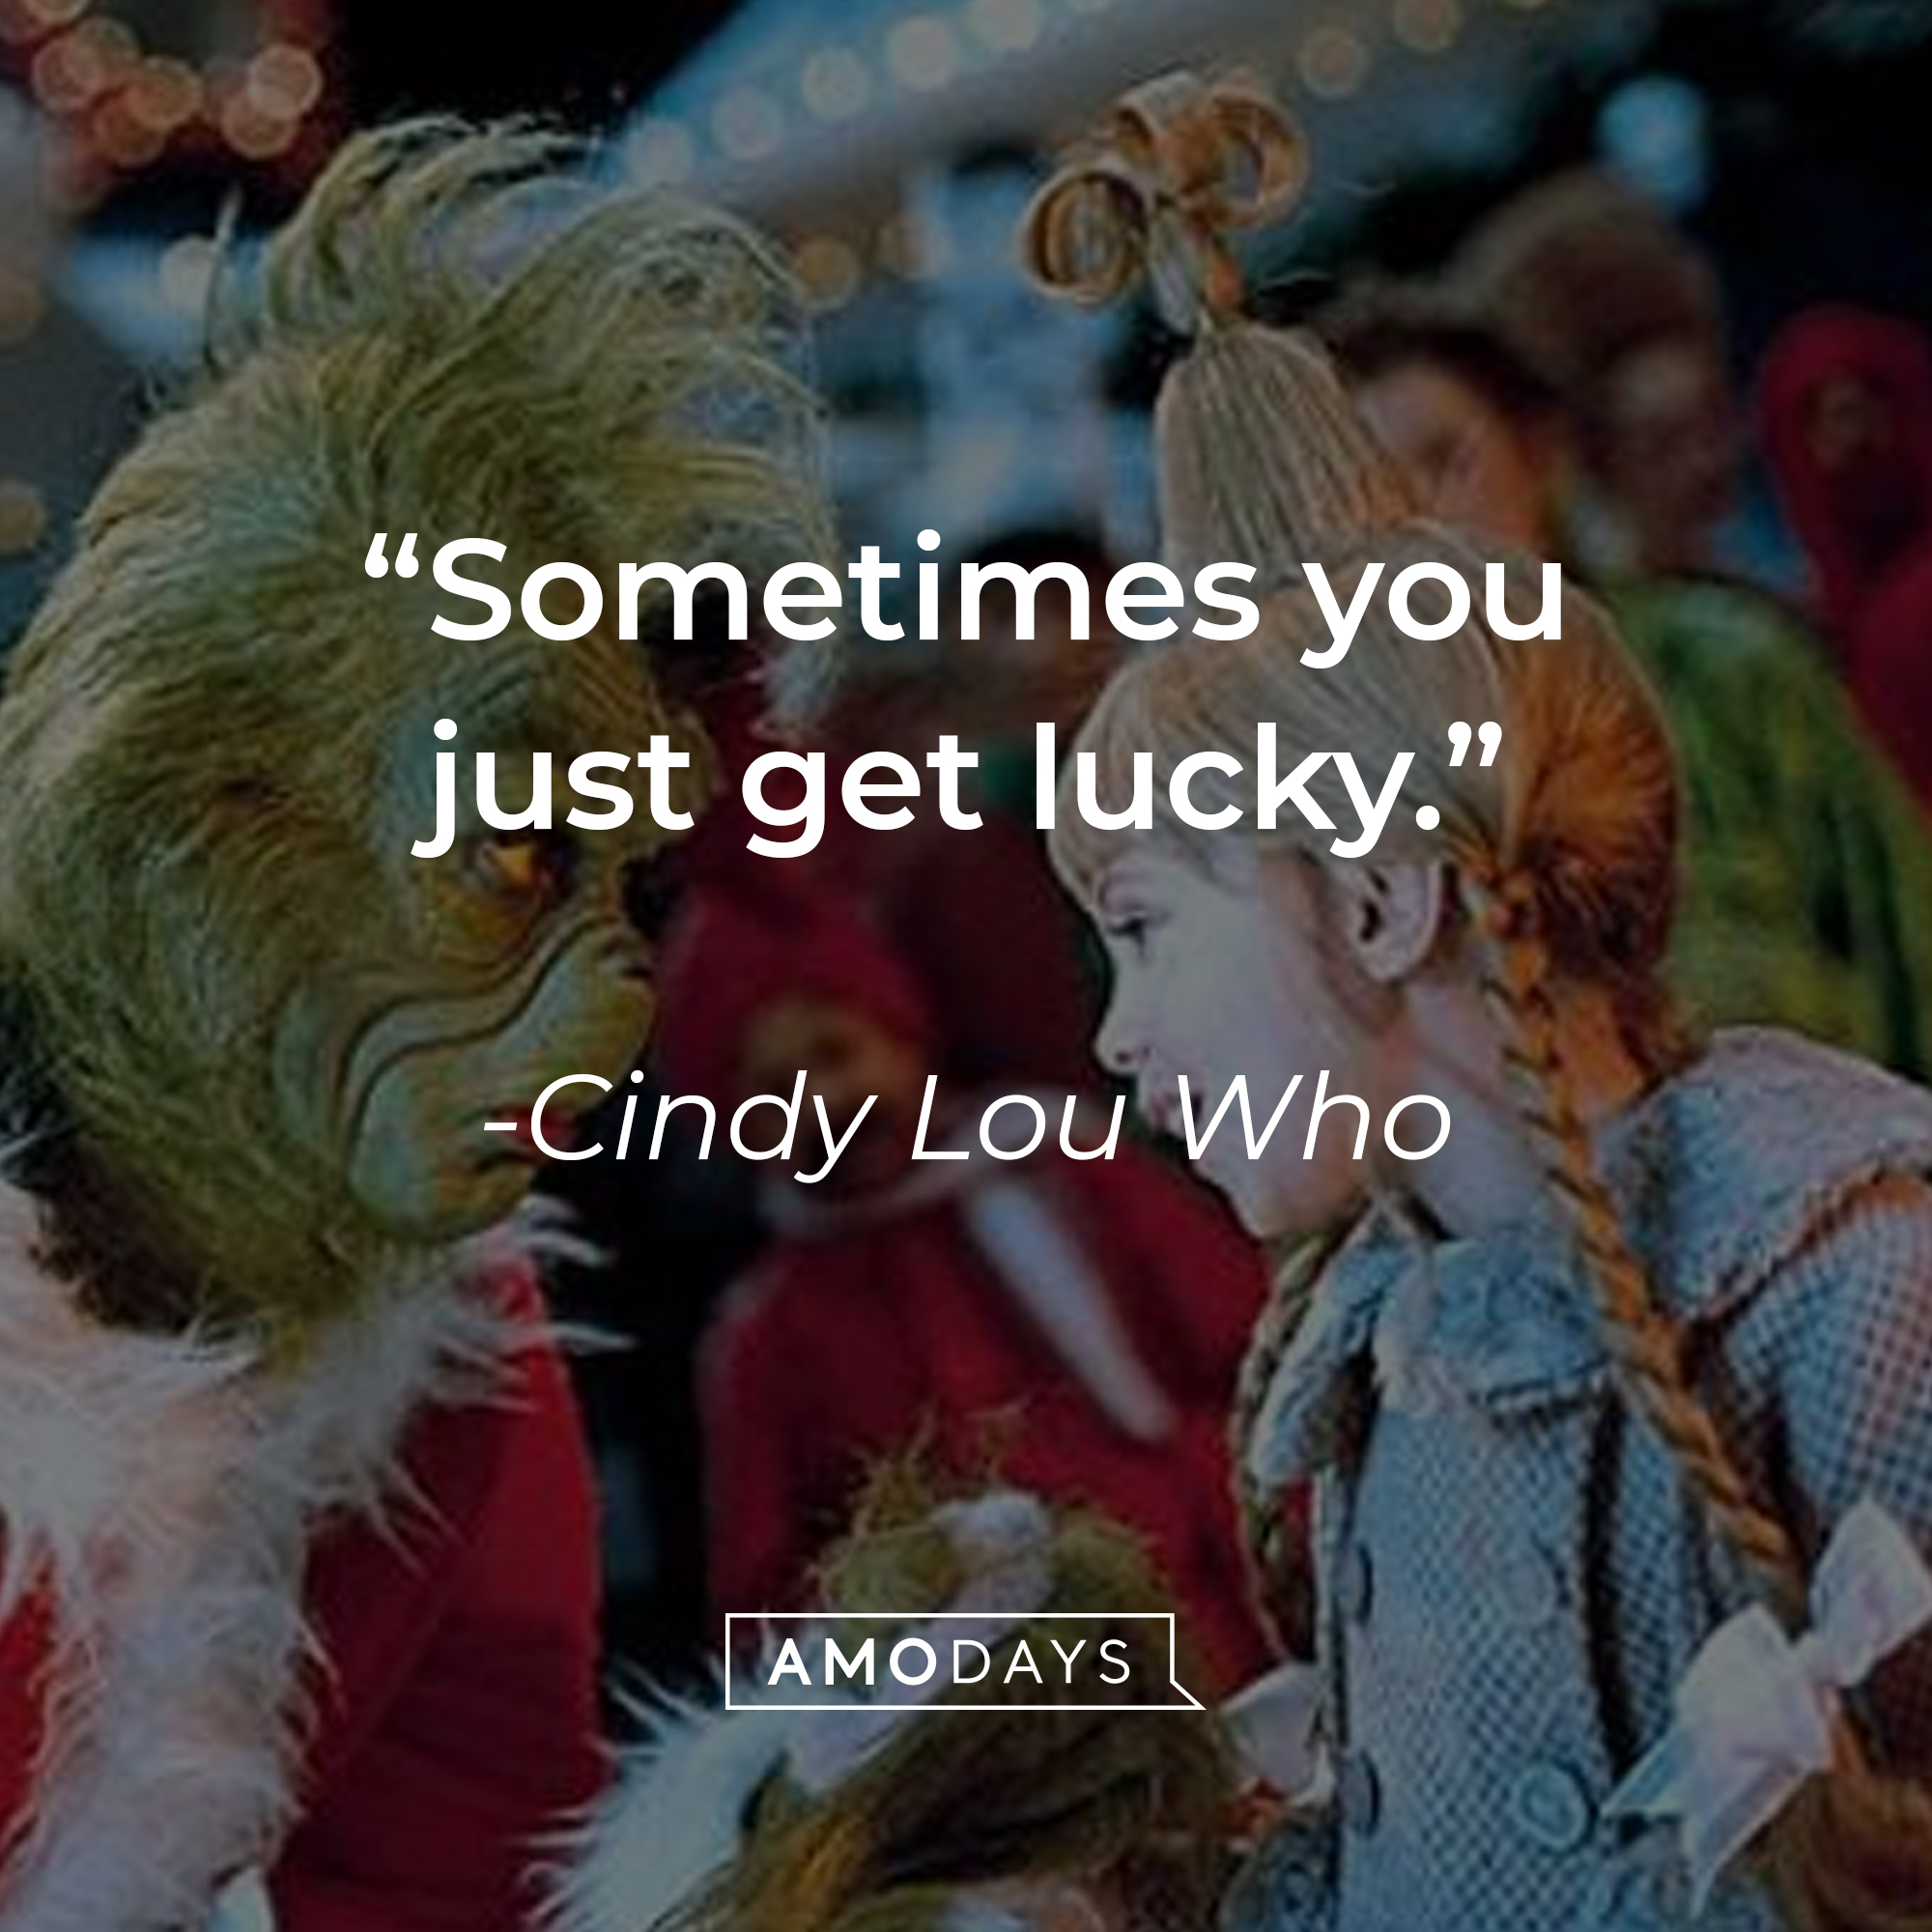 Cindy Lou Who and the Grinch, with Who’s quote: “Sometimes you just get lucky.” | Source: Youtube.com/UniversalPictures